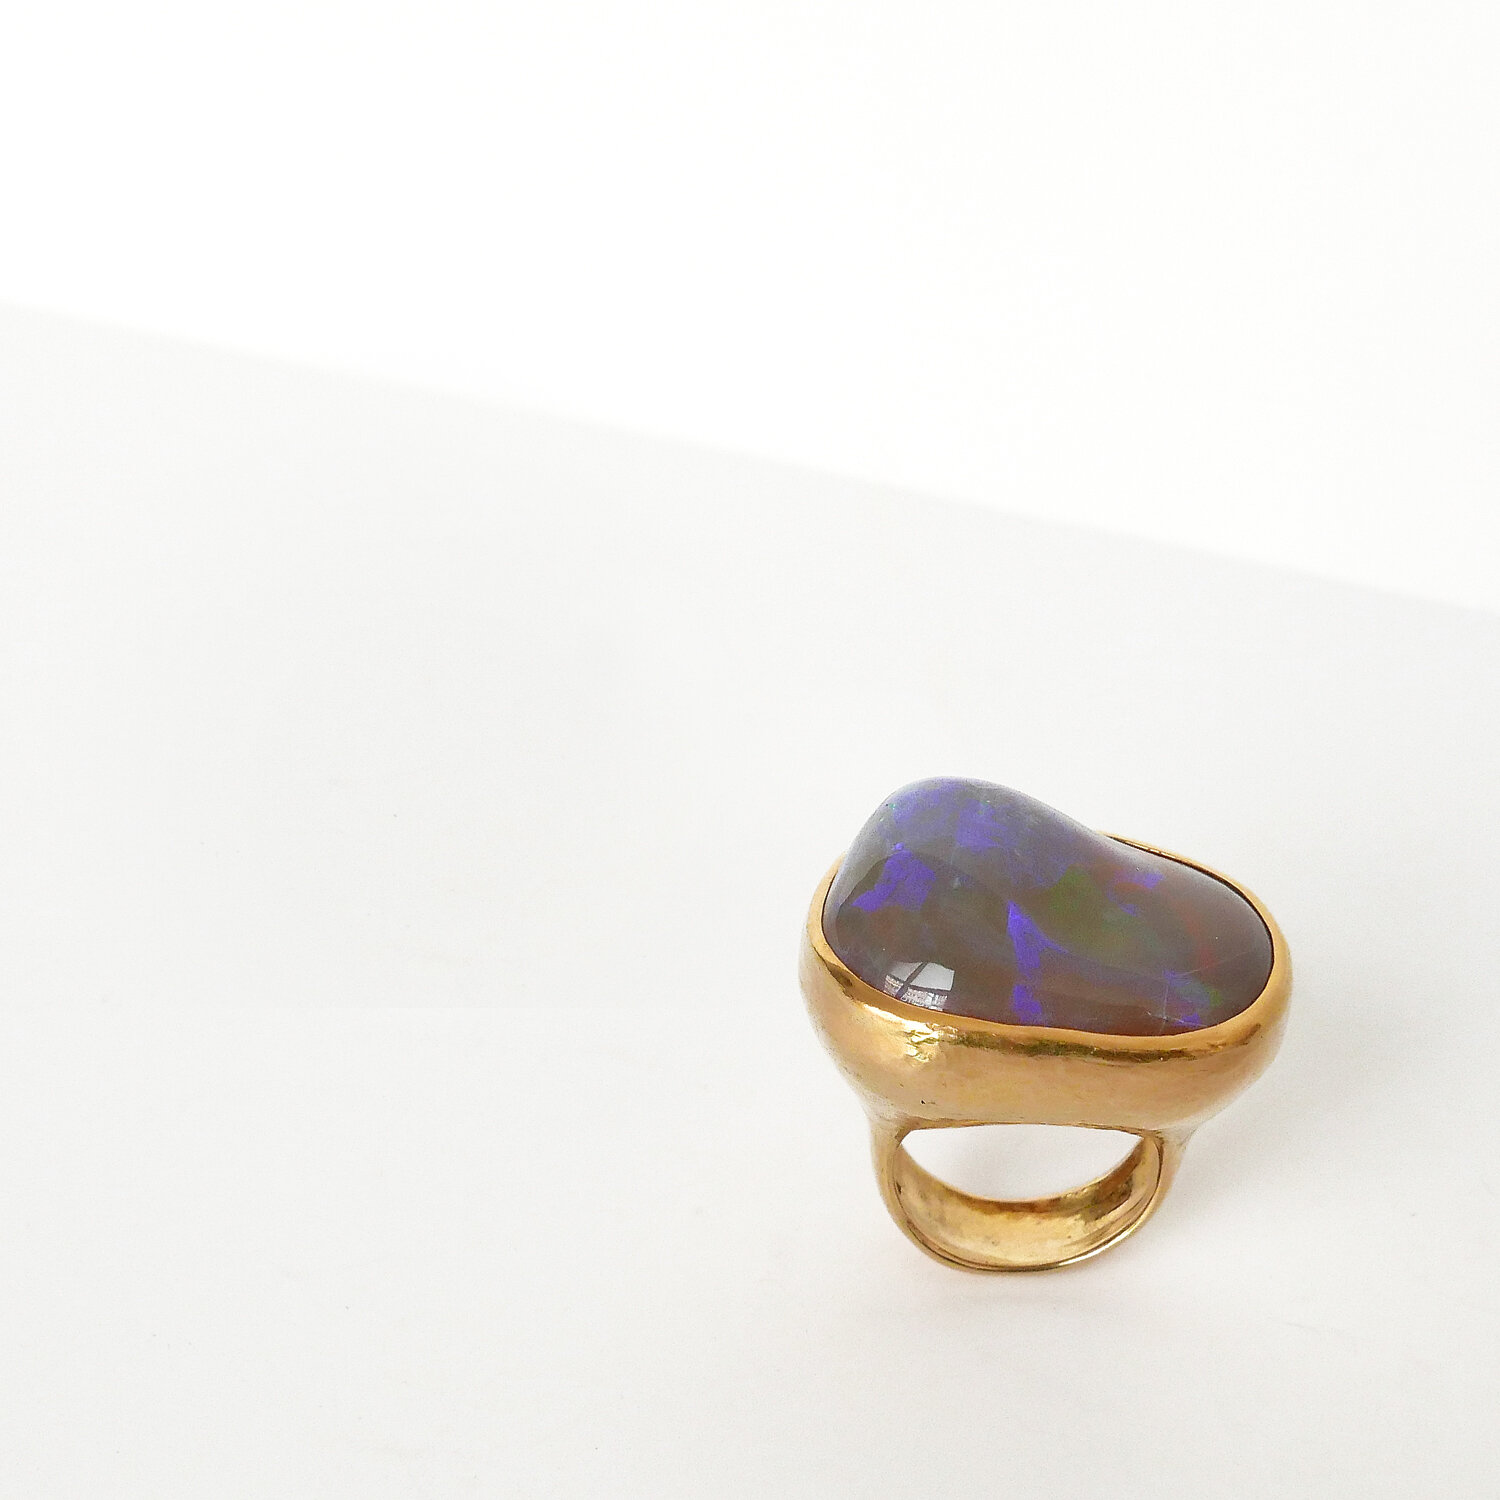 Discover more than 85 large opal ring best - vova.edu.vn